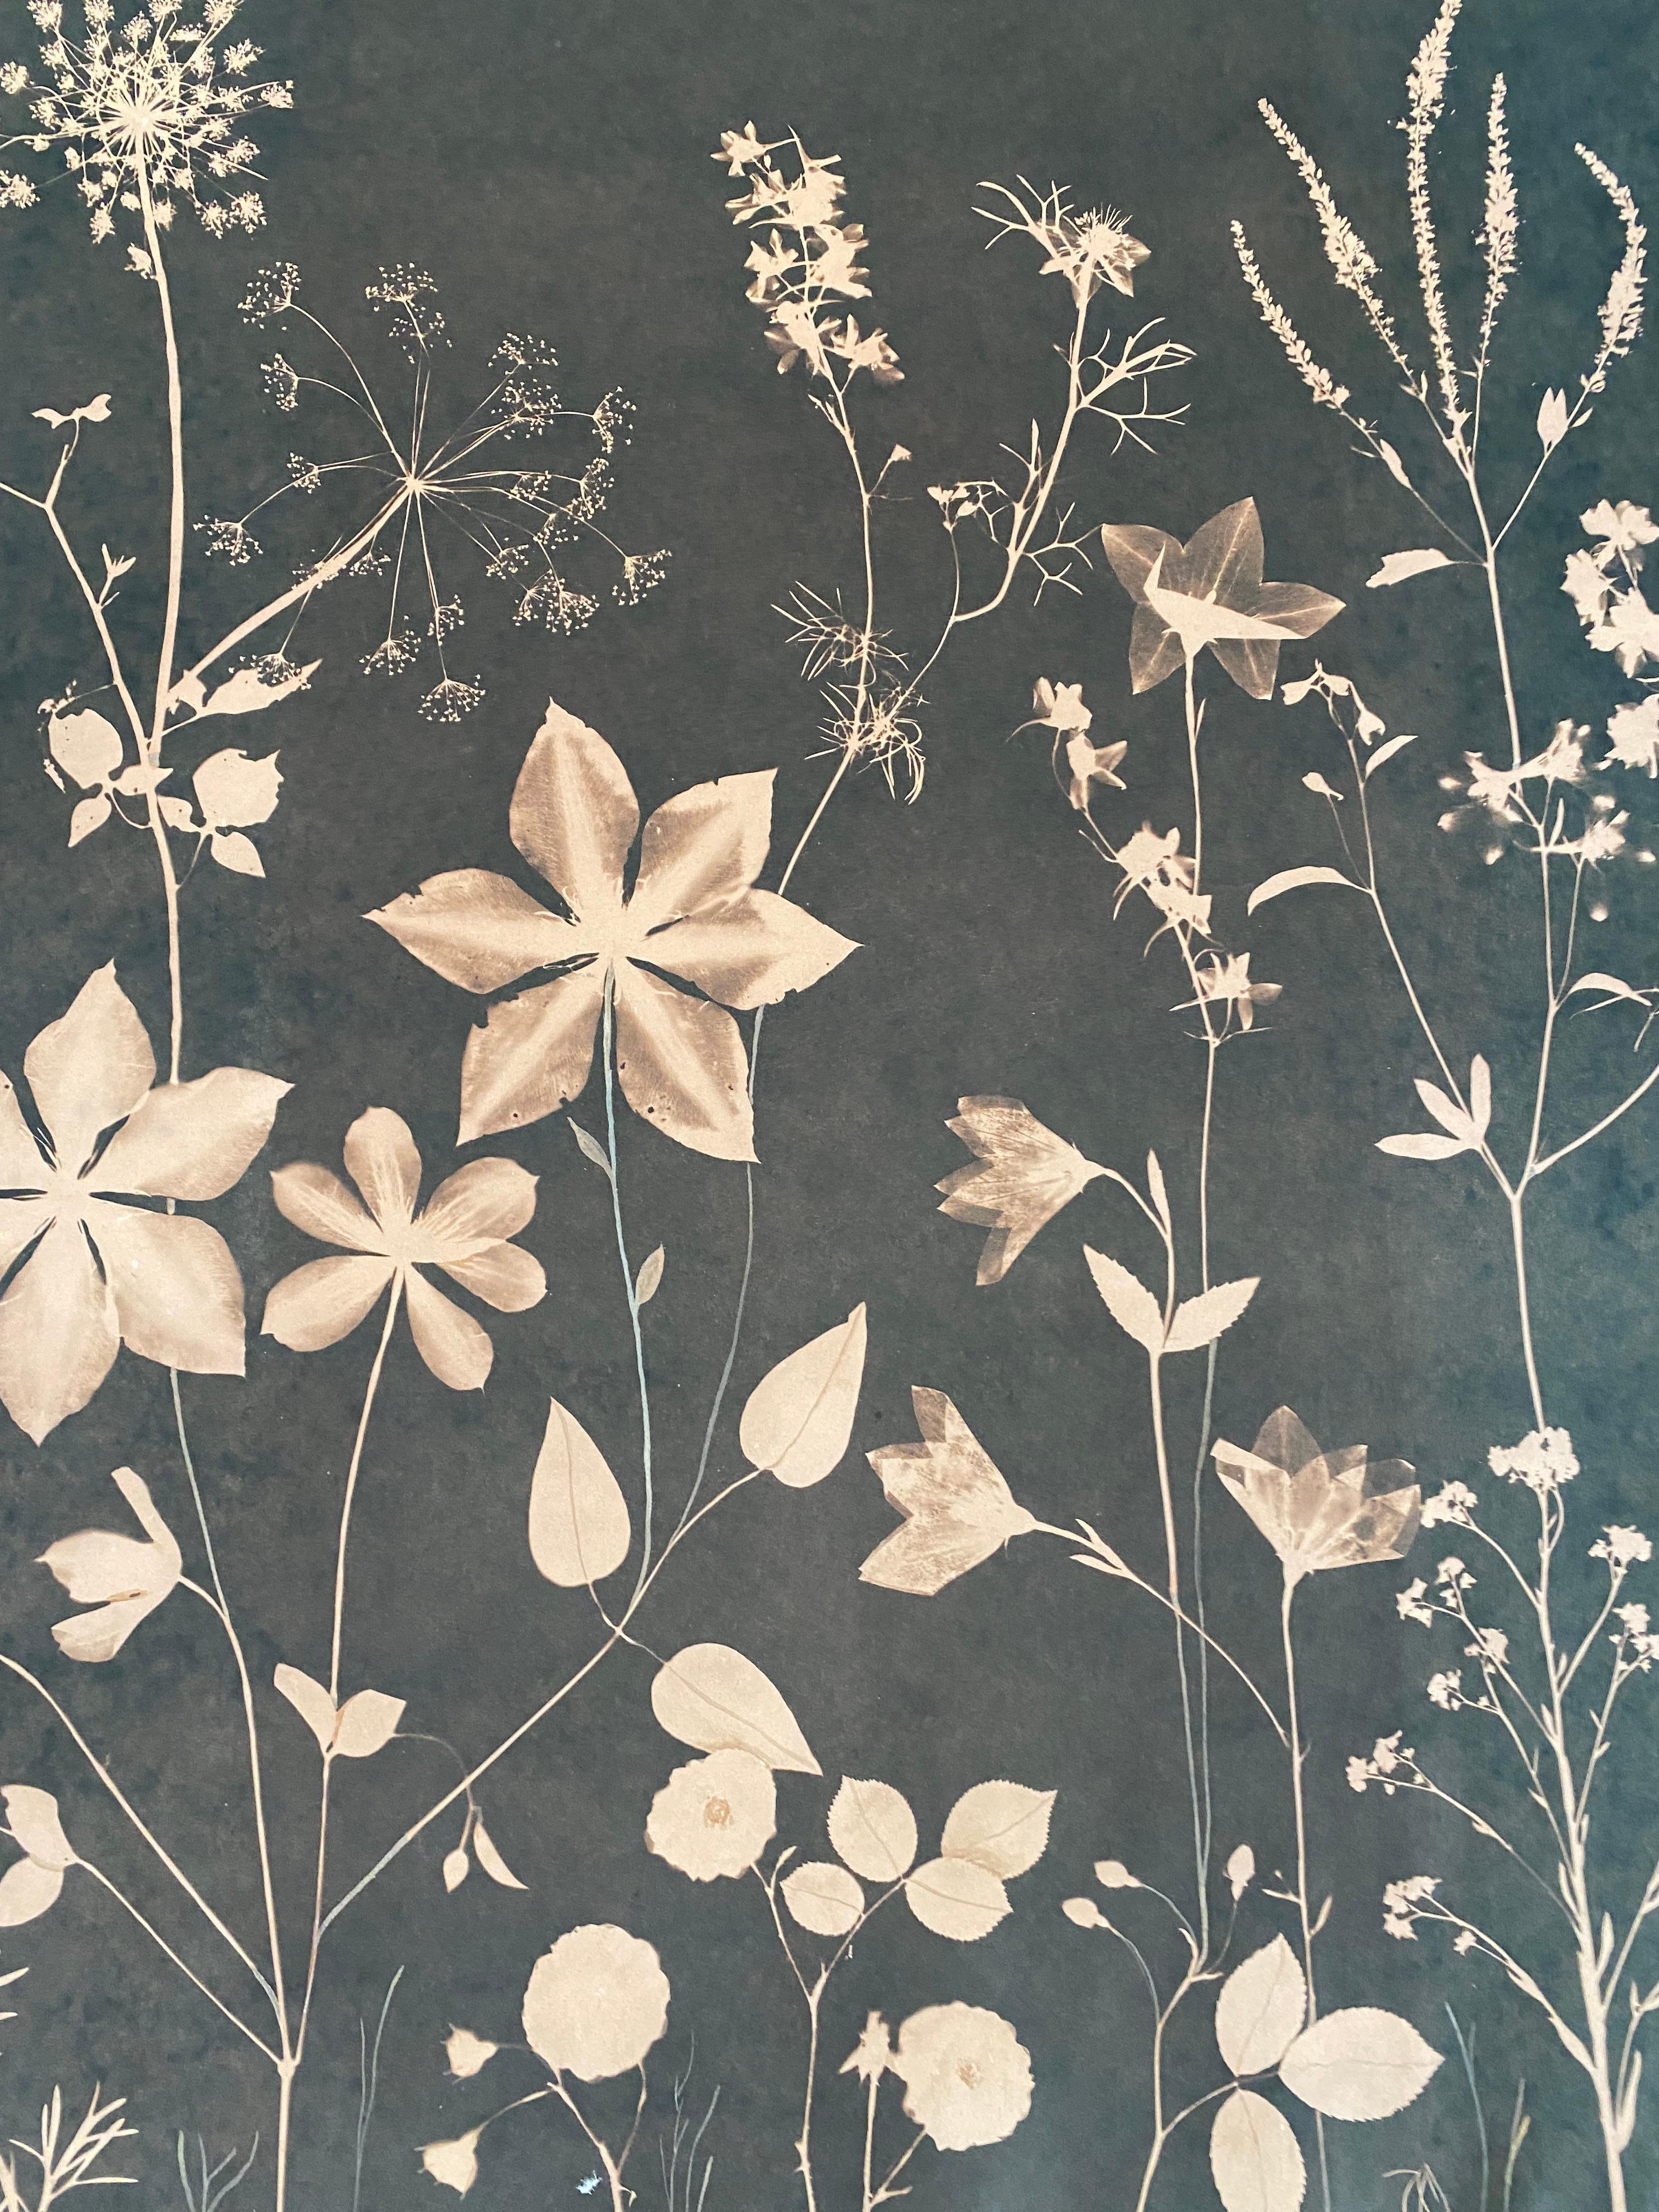 Meticulously detailed flowers, including clematis, Queen Anne's lace, and forget me nots are depicted in a luminous shade of pale sienna brown against a dark background in this watercolor, gouache, and tea toned cyanotype on hot press watercolor